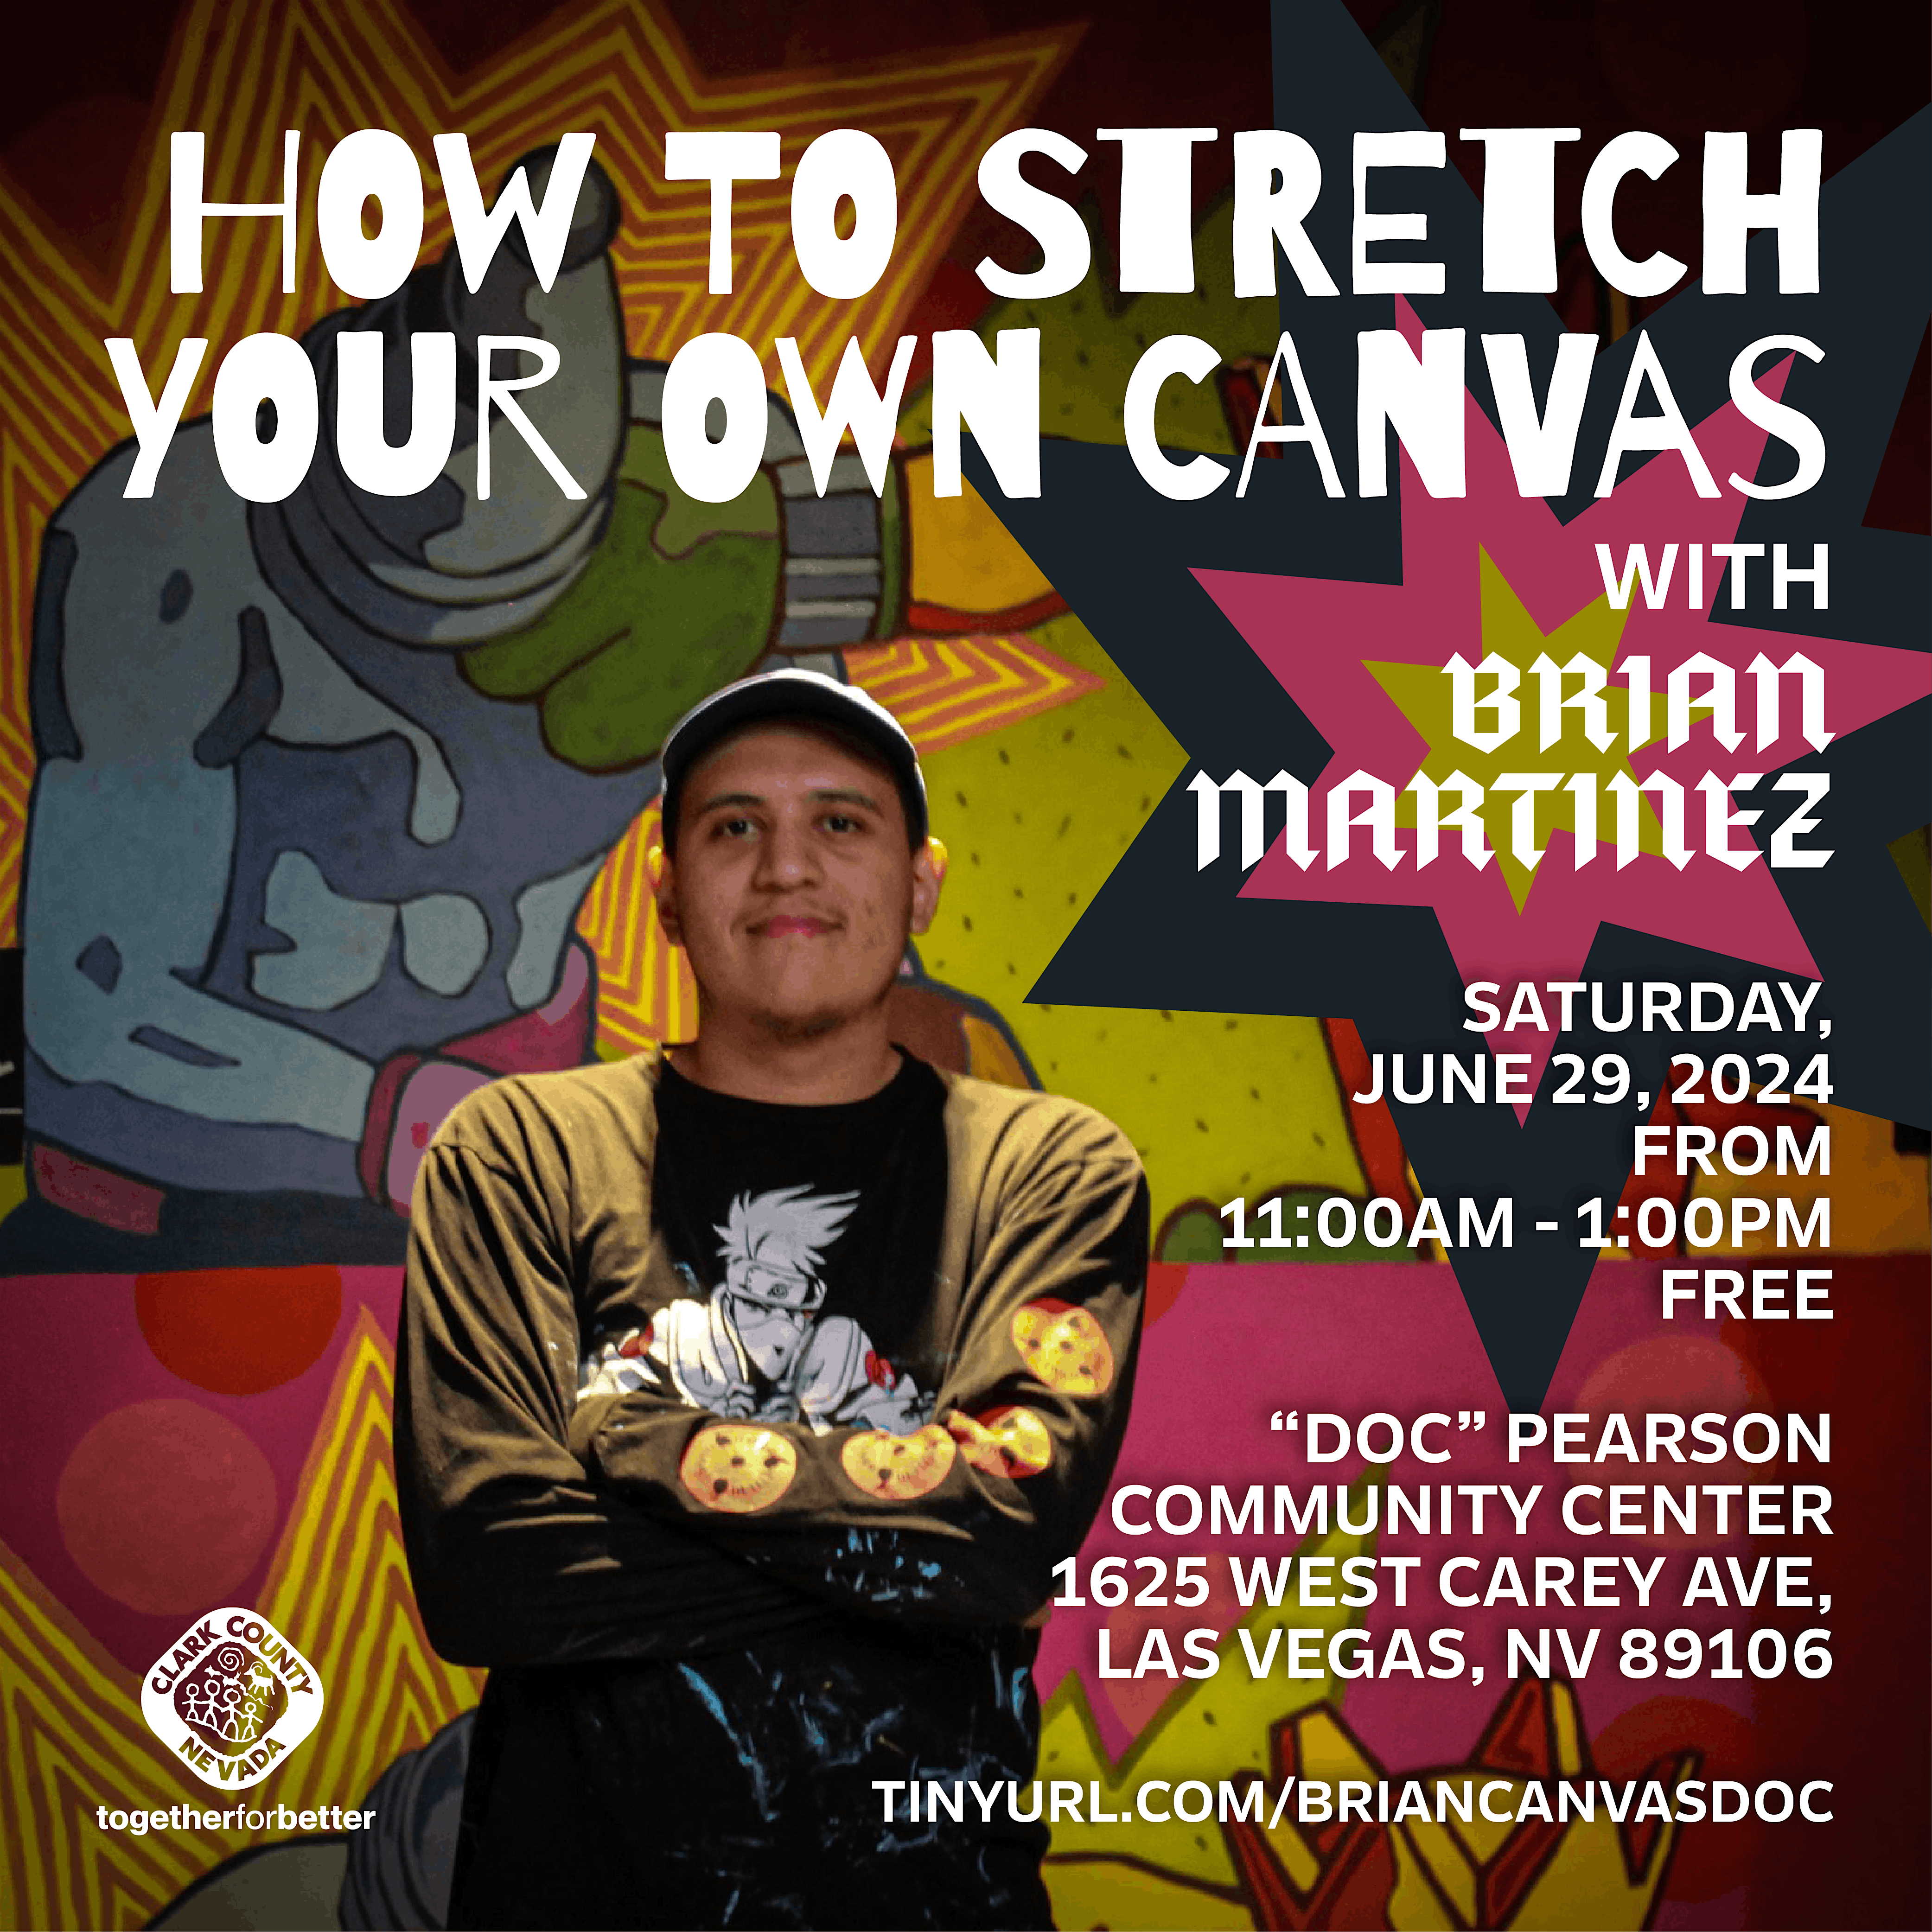 FREE WORKSHOP - How to Stretch Your Own Canvas by Brian Martinez